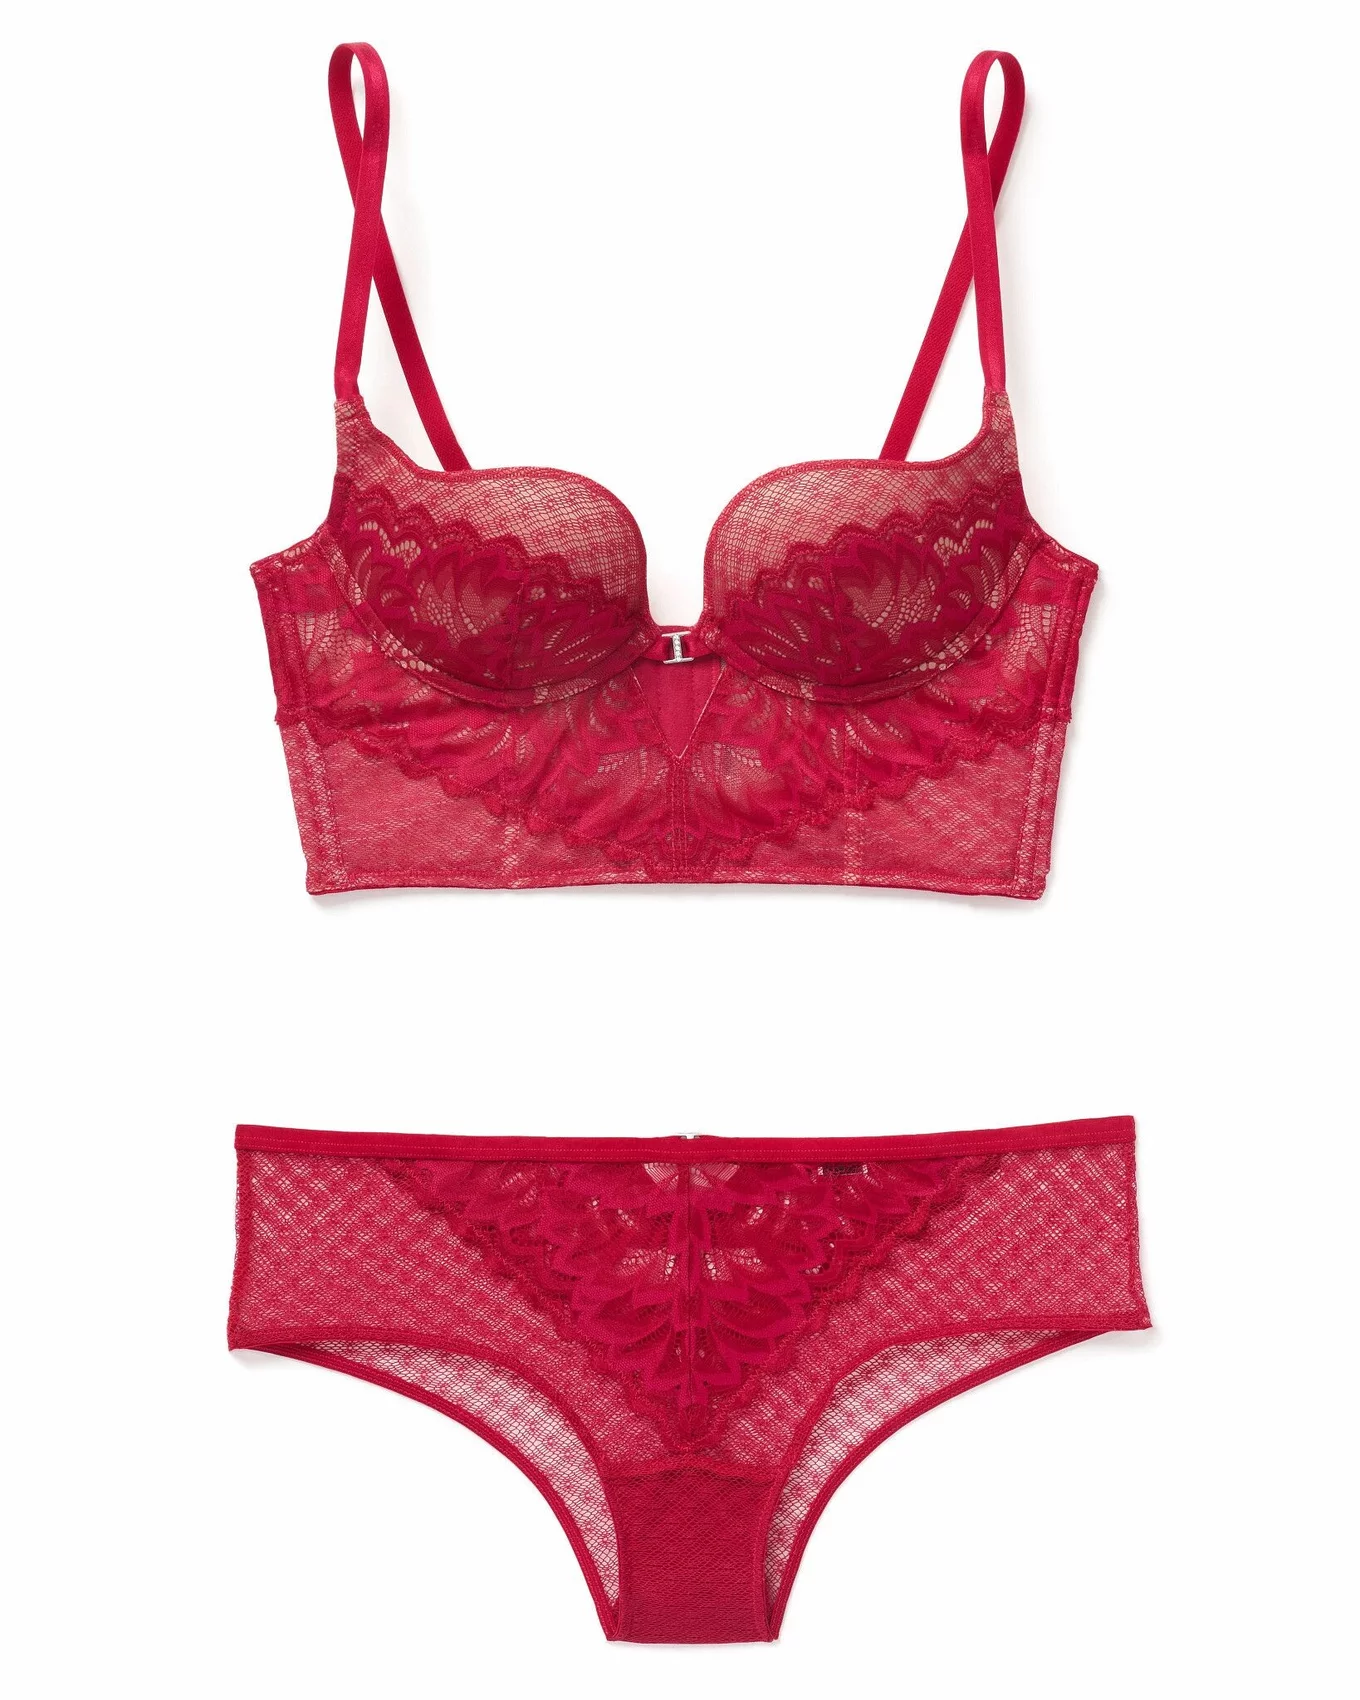 Adore Me - Classic color, modern details, strong support.